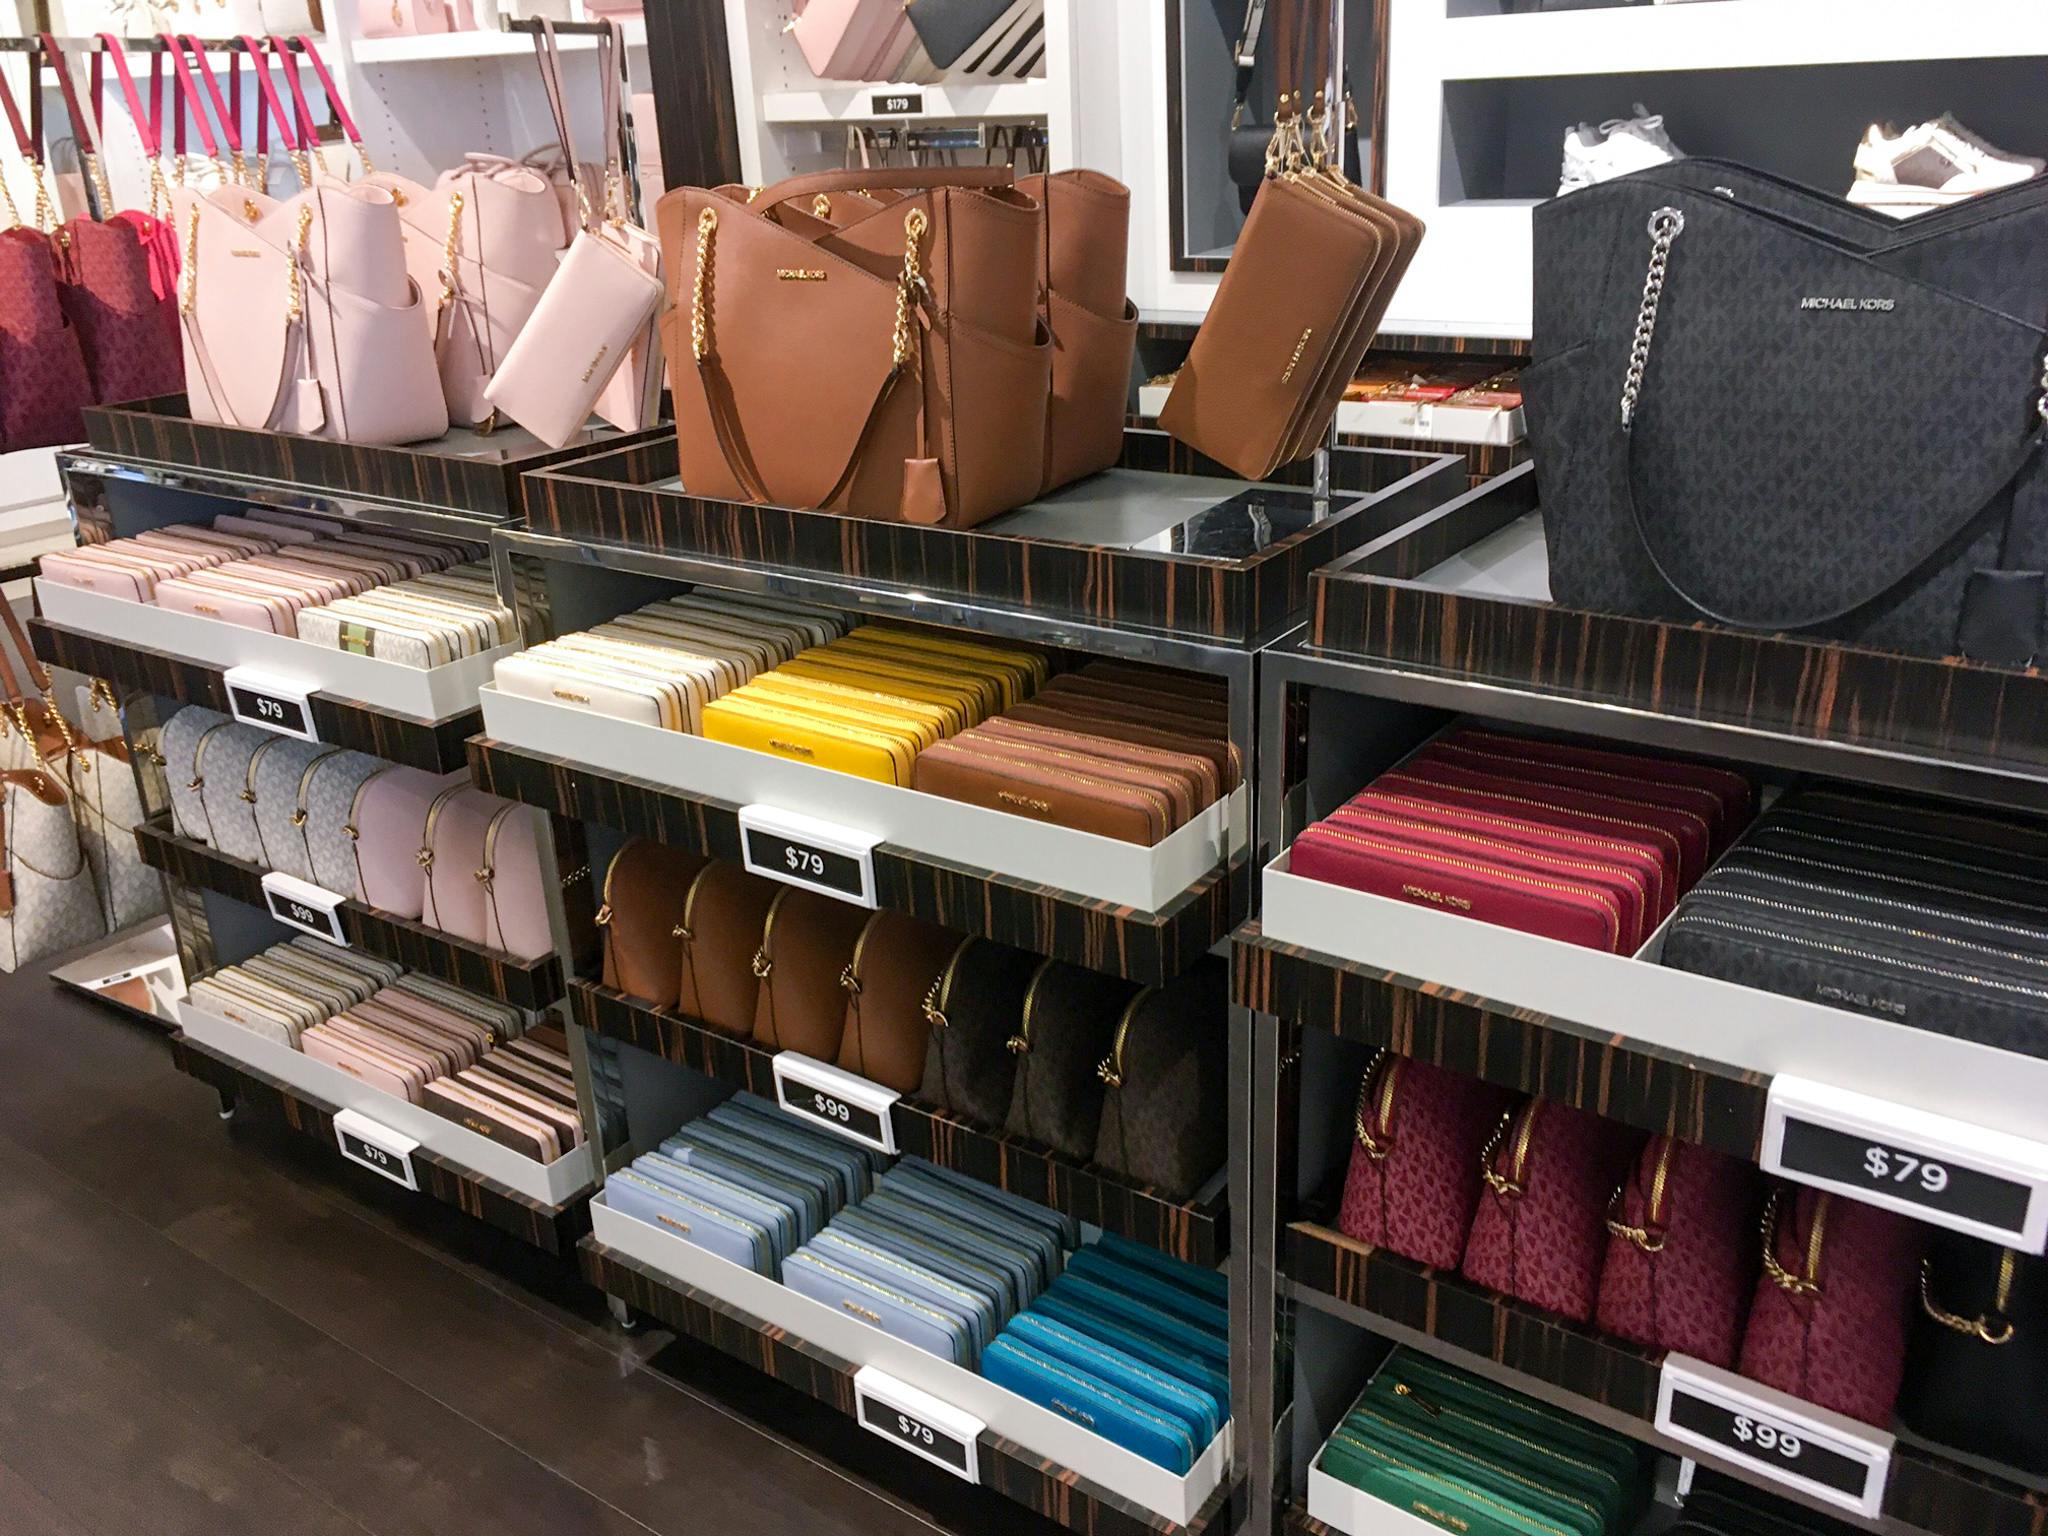 Michael Kors Extra Savings Sale: $44 Wallets & $59 Bags - The Krazy Coupon  Lady